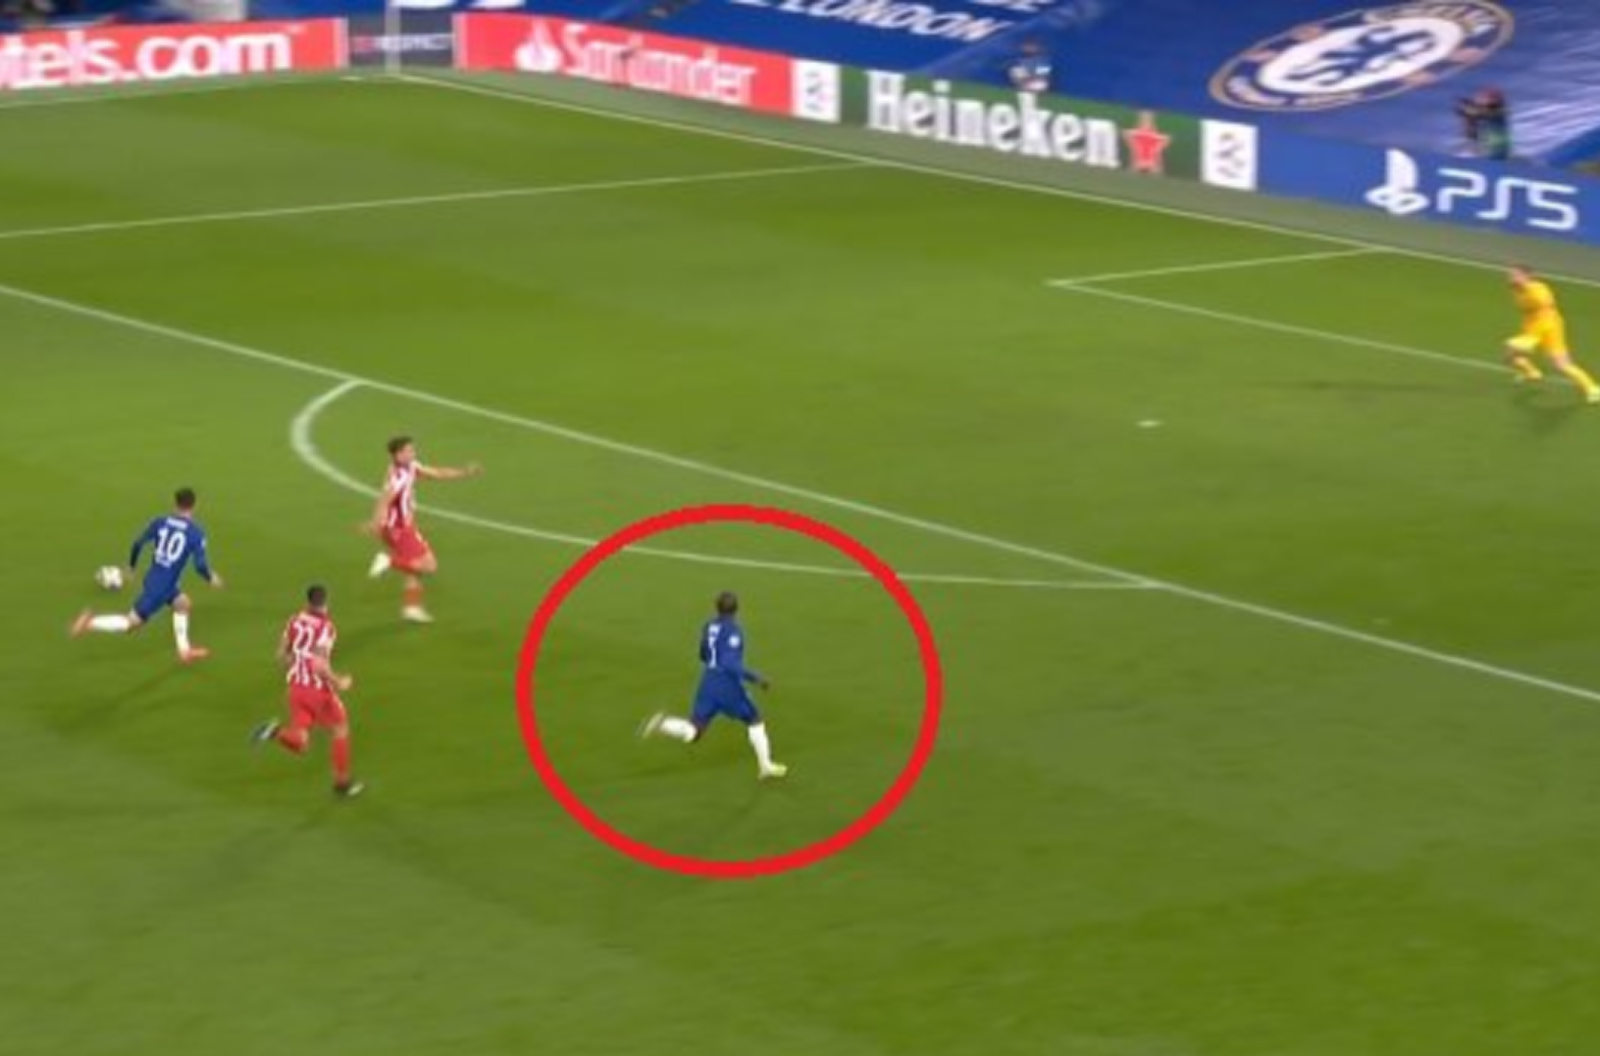 The deceptive run from N’Golo Kante that everyone was talking about during Chelsea’s 2-0 win Atletico Madrid